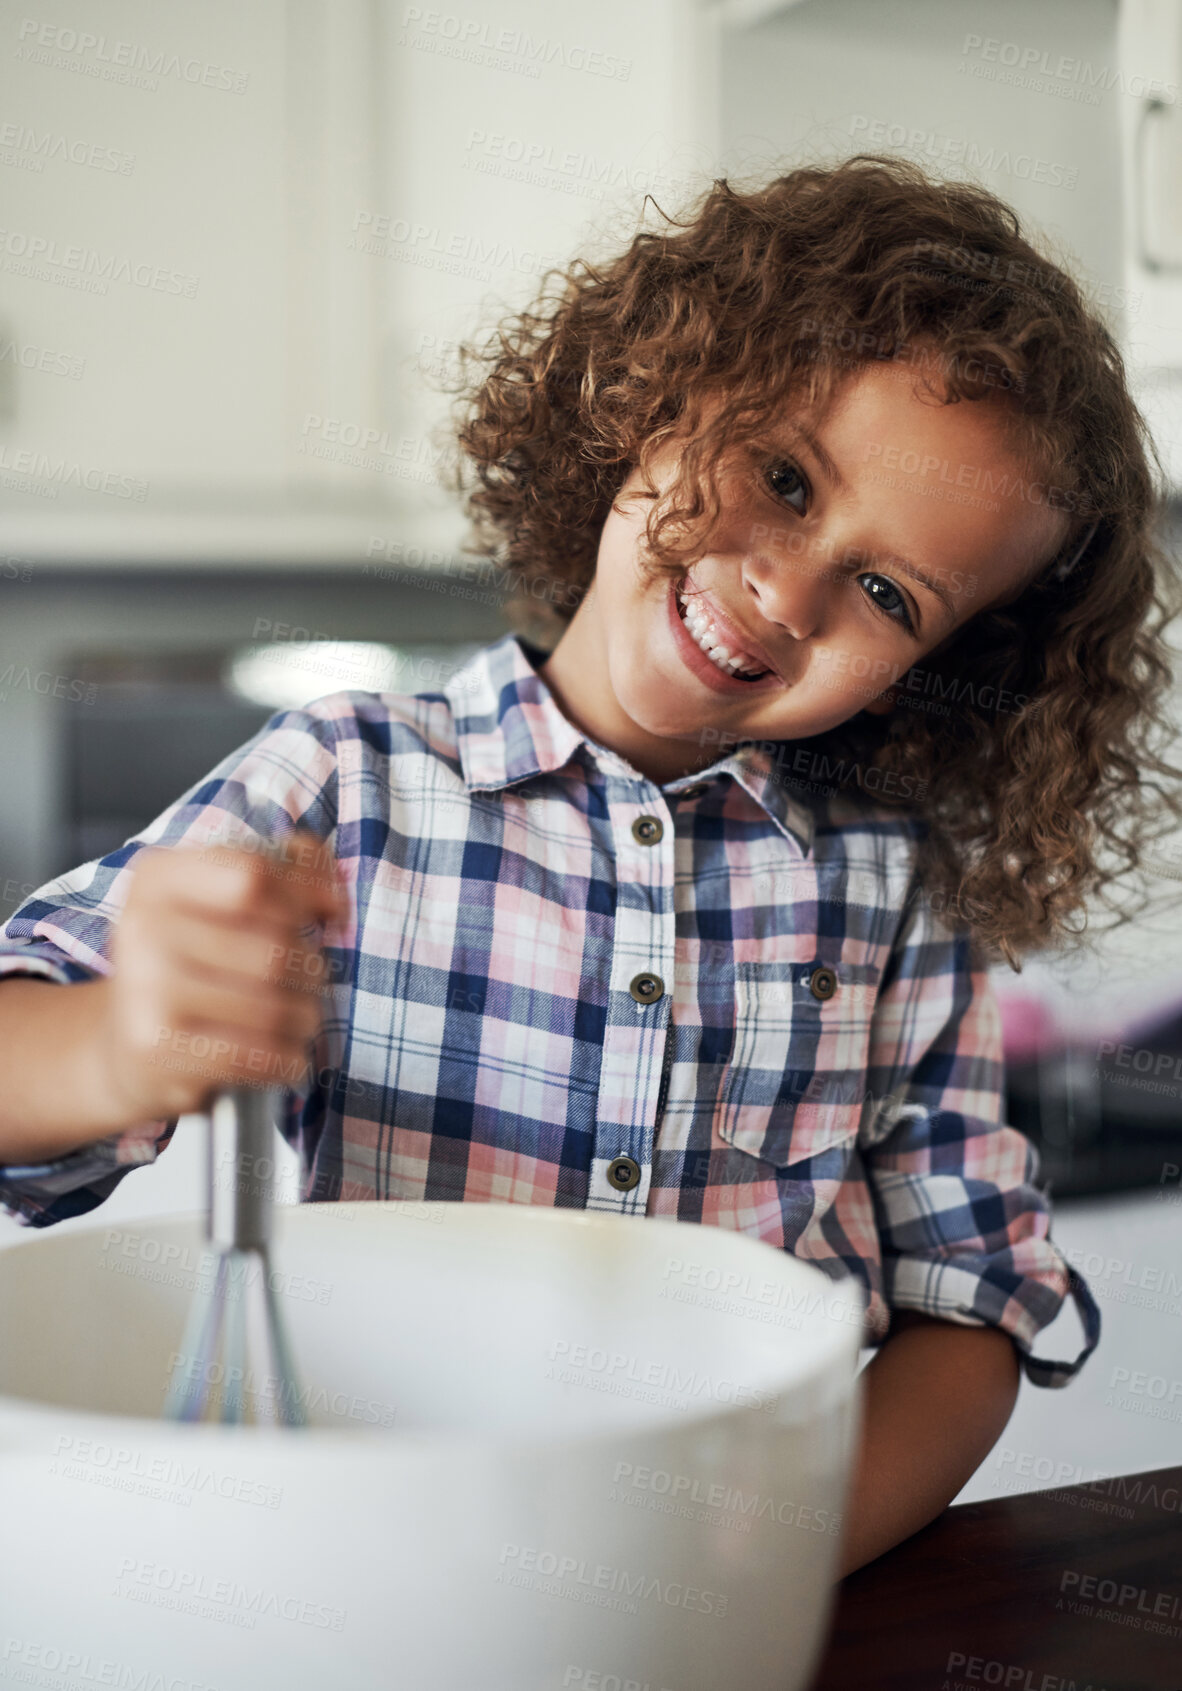 Buy stock photo Portrait of a playful little girl having fun while baking in the kitchen at home